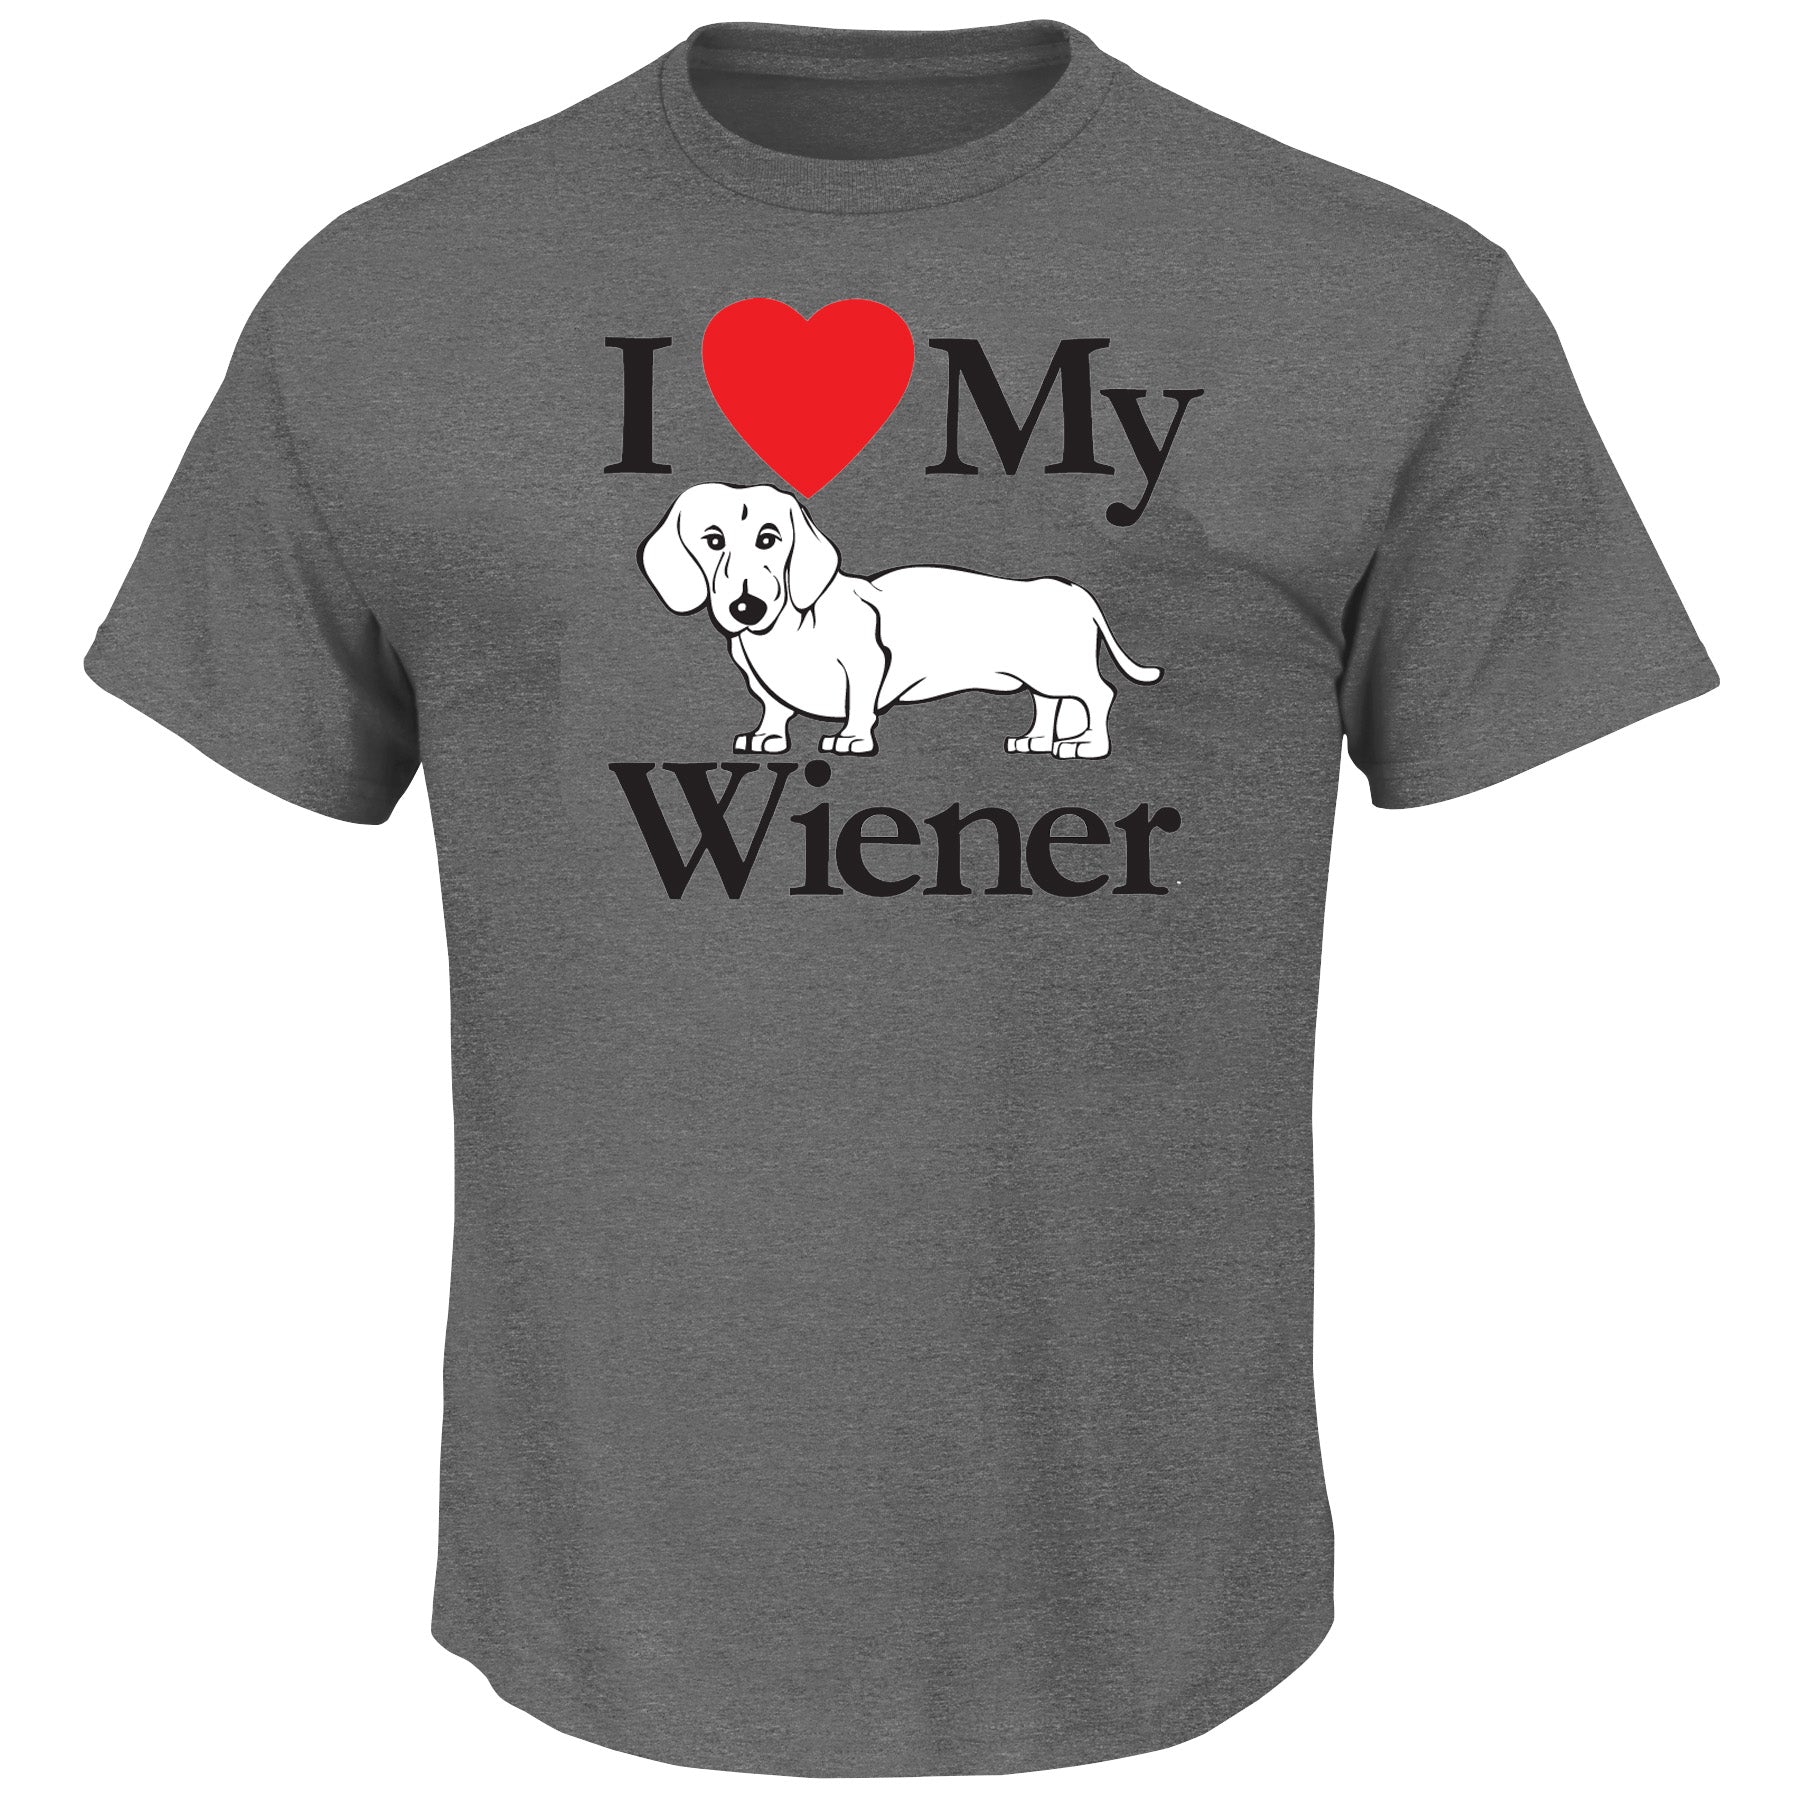 Funny Guy T-shirts - I Trip Over My Wiener T-shirt - Guy Humour T-shir